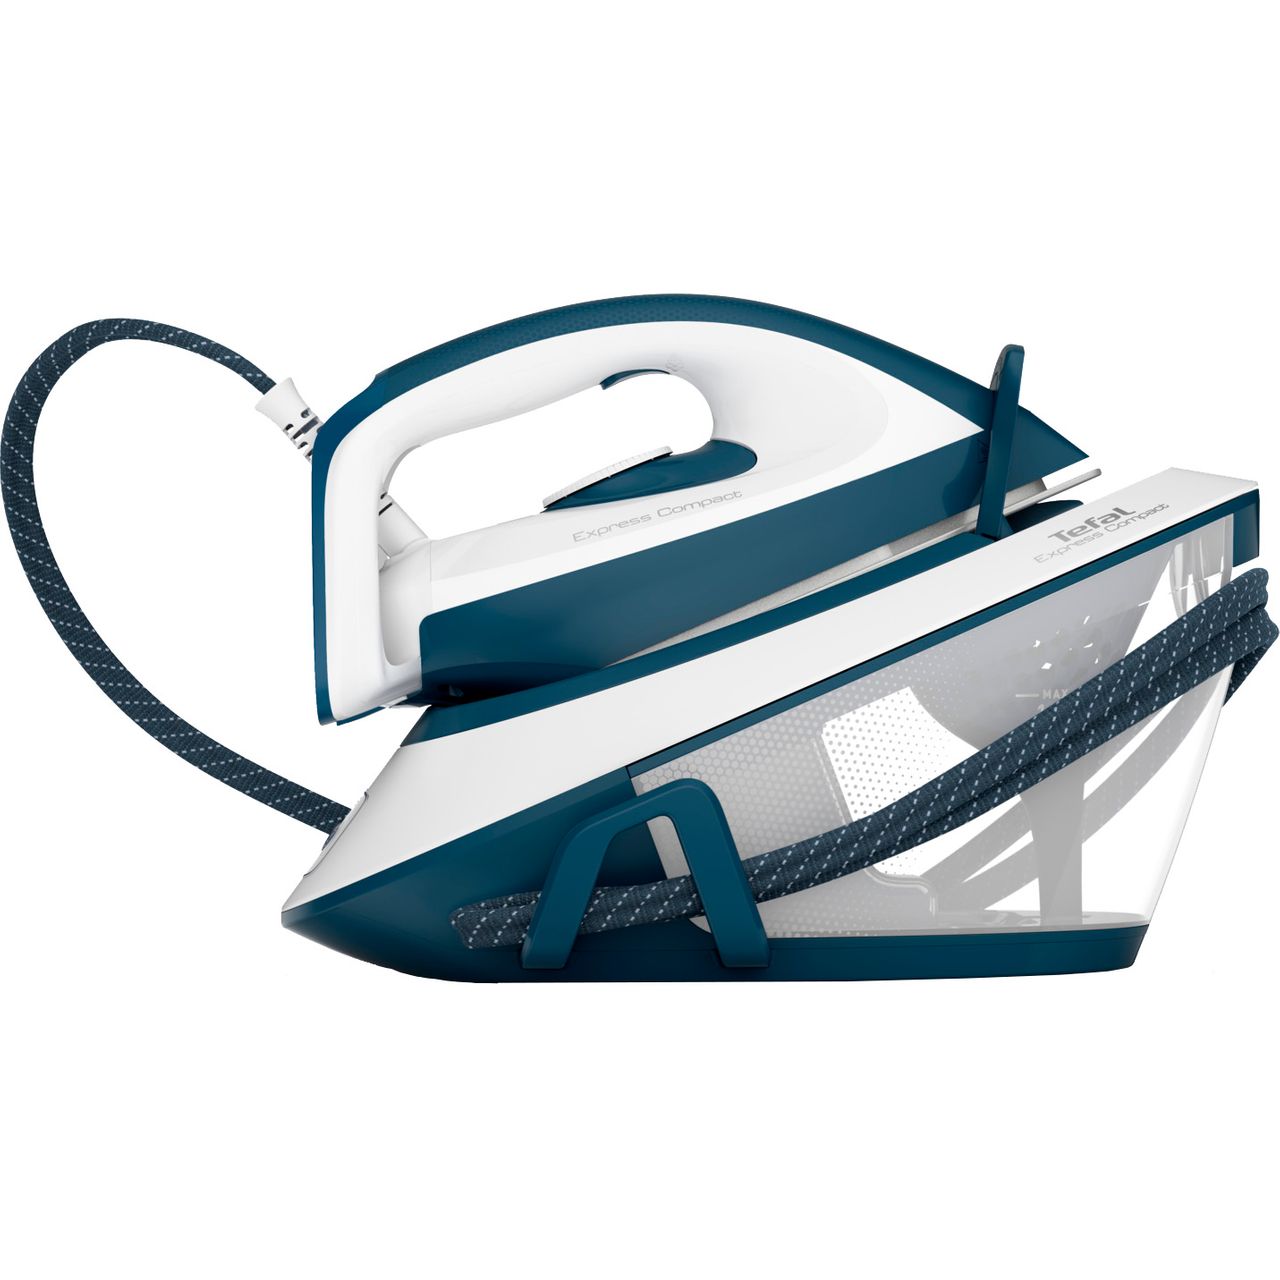 Tefal Express Compact SV7110G0 Steam Generator Iron Review